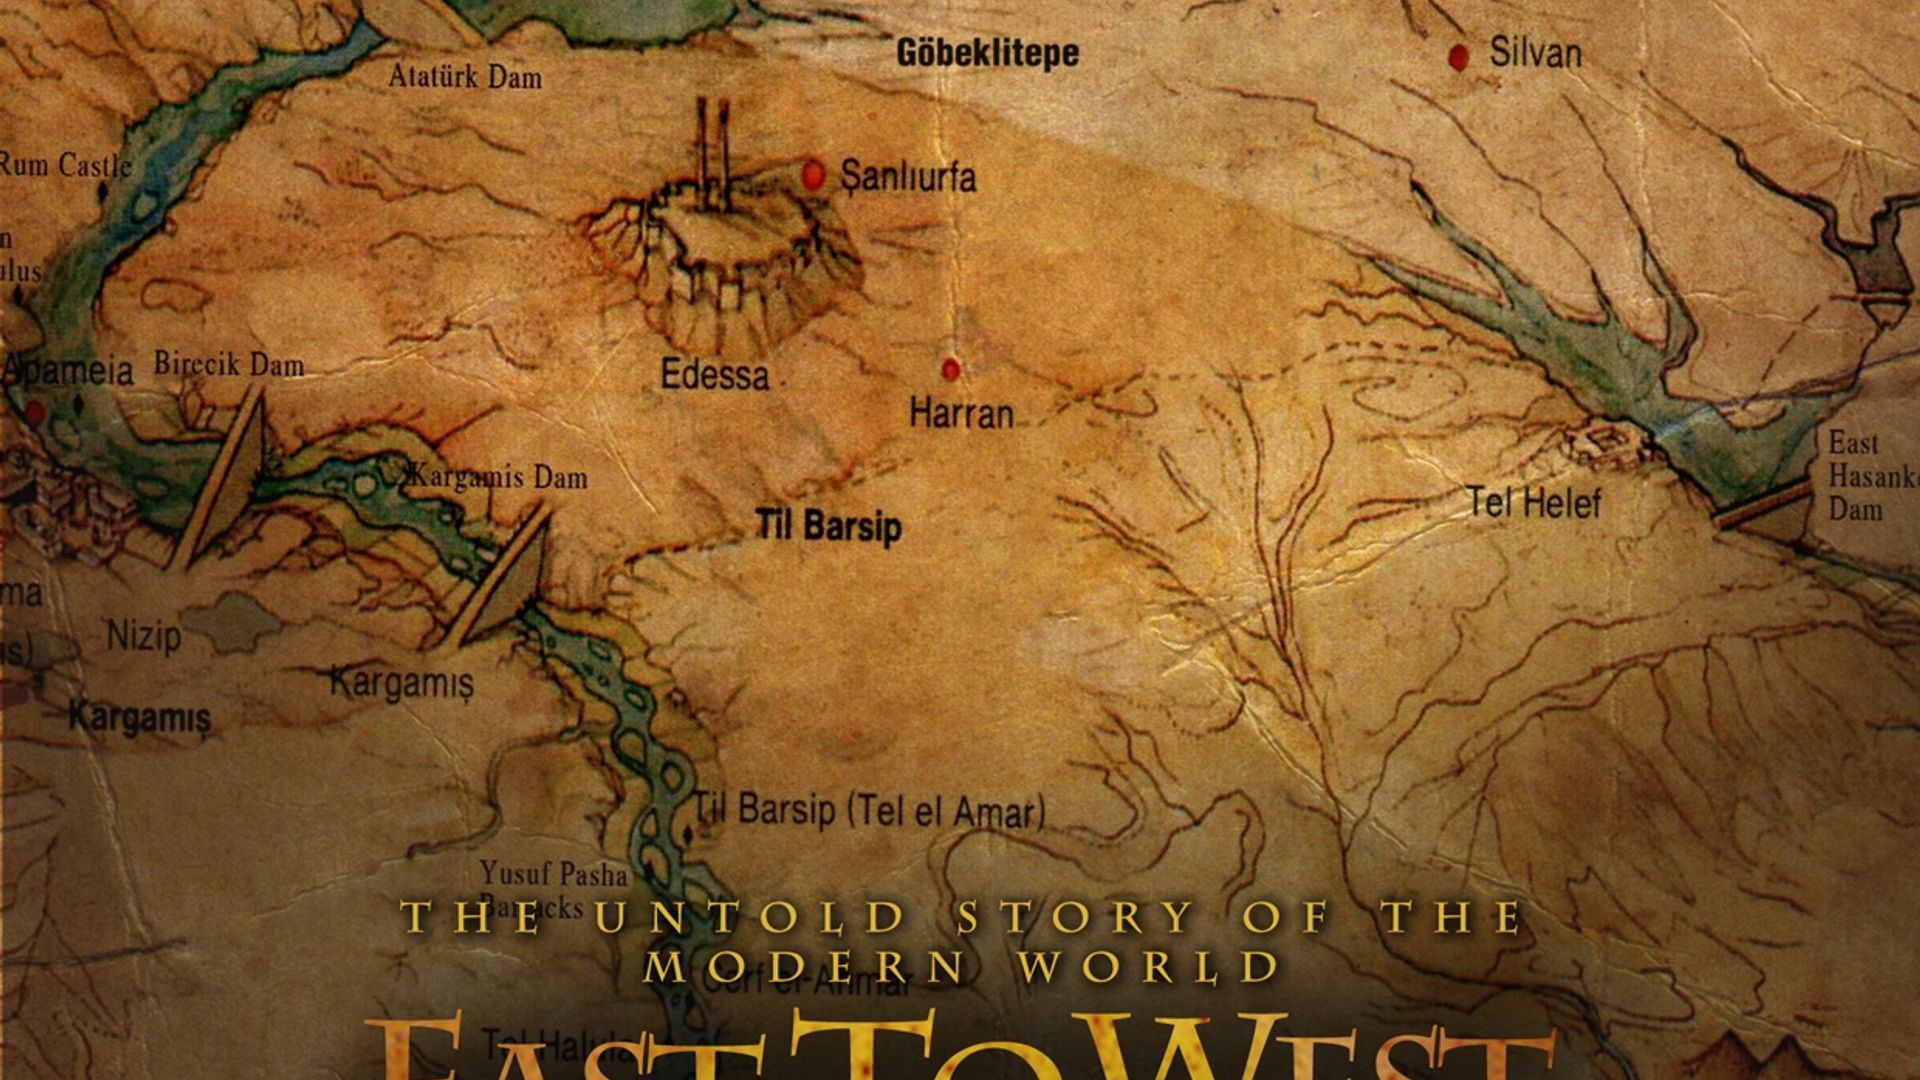 East to West background